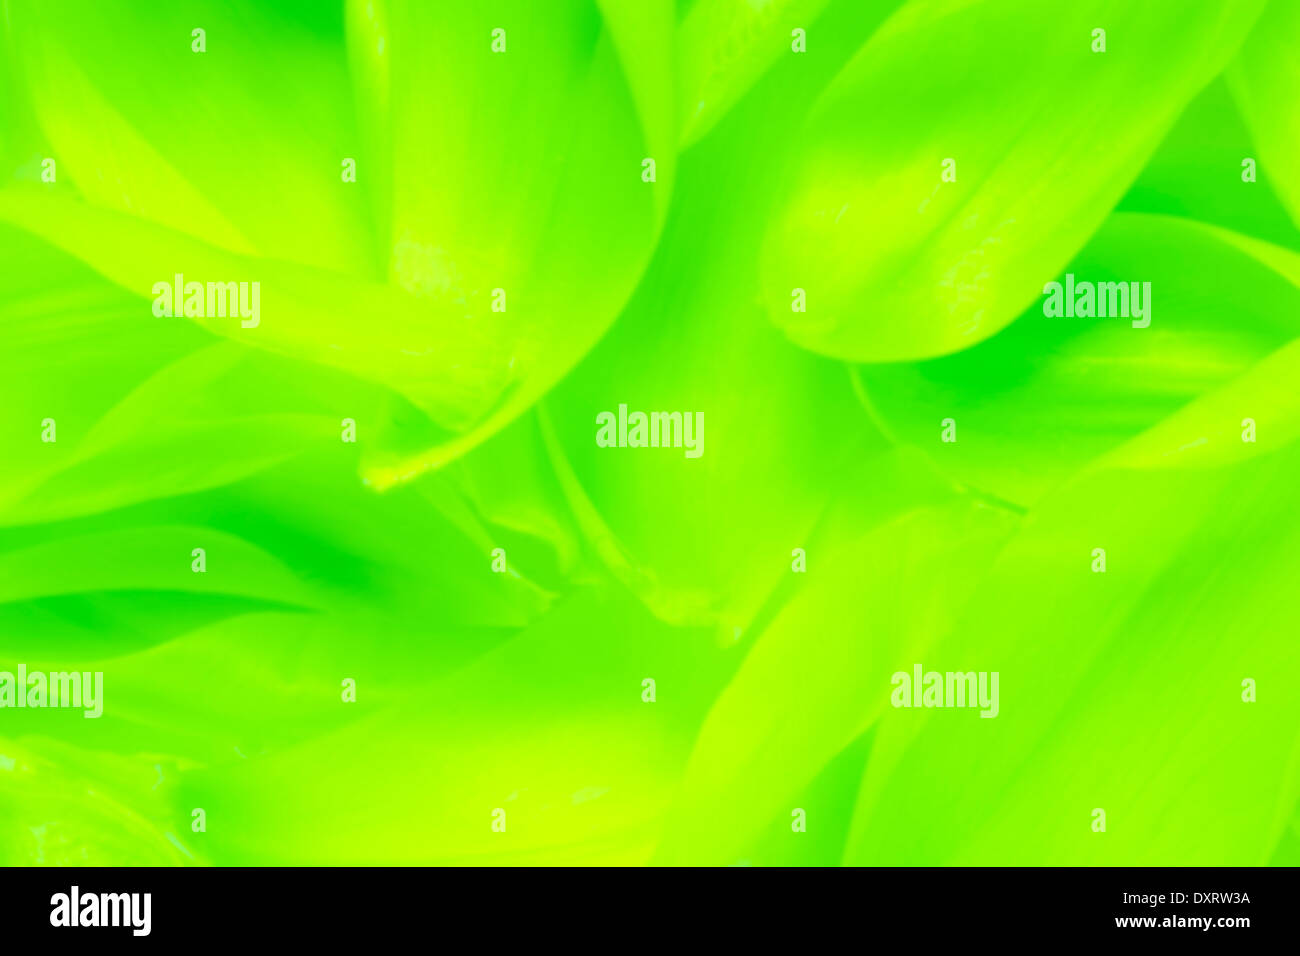 green abstract background or flower petal texture Stock Photo